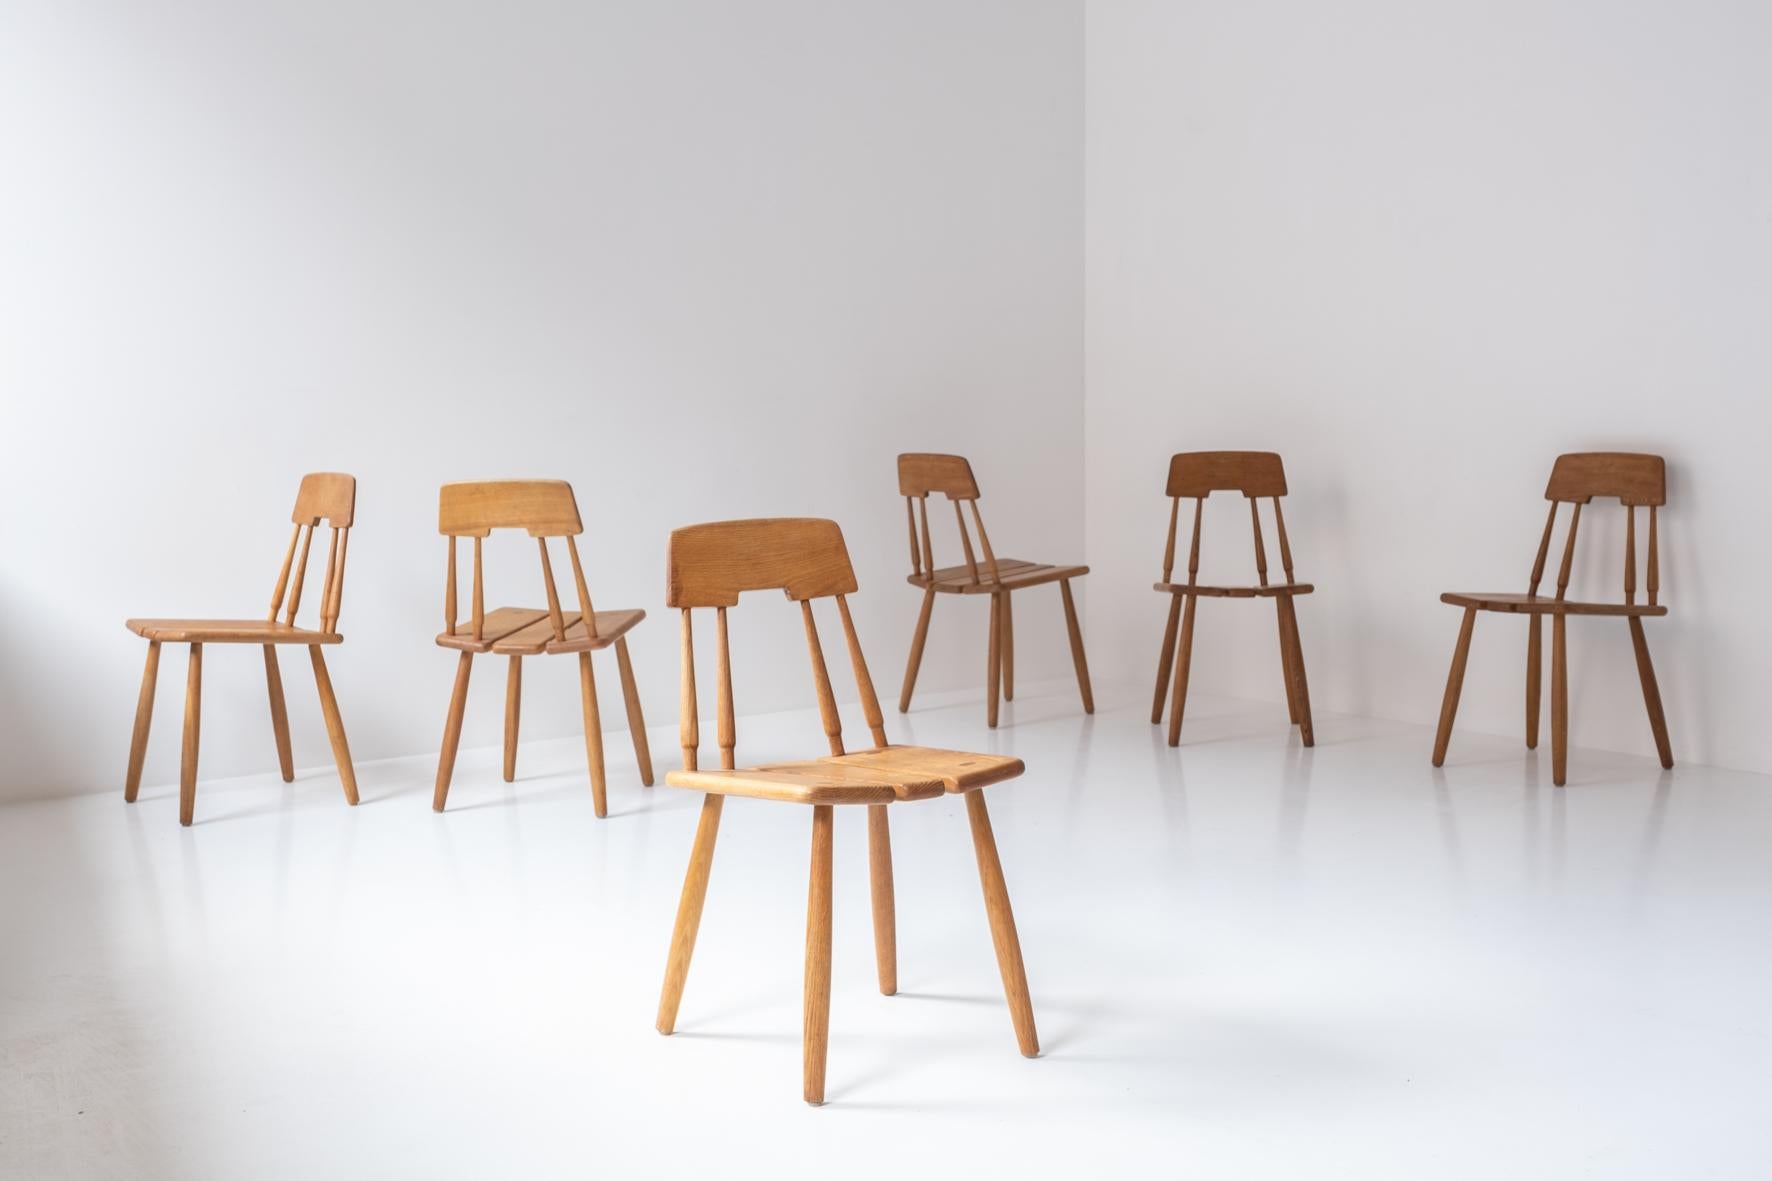 Lovely set of 6 dining chairs by Carl-Gustav Boulogner for AB Bröderna Wigells Stolfabrik, Sweden 1960s. These chairs are made out of solid oak and are all in a very well presented original condition. Collector’s item. Sold as a set of 6